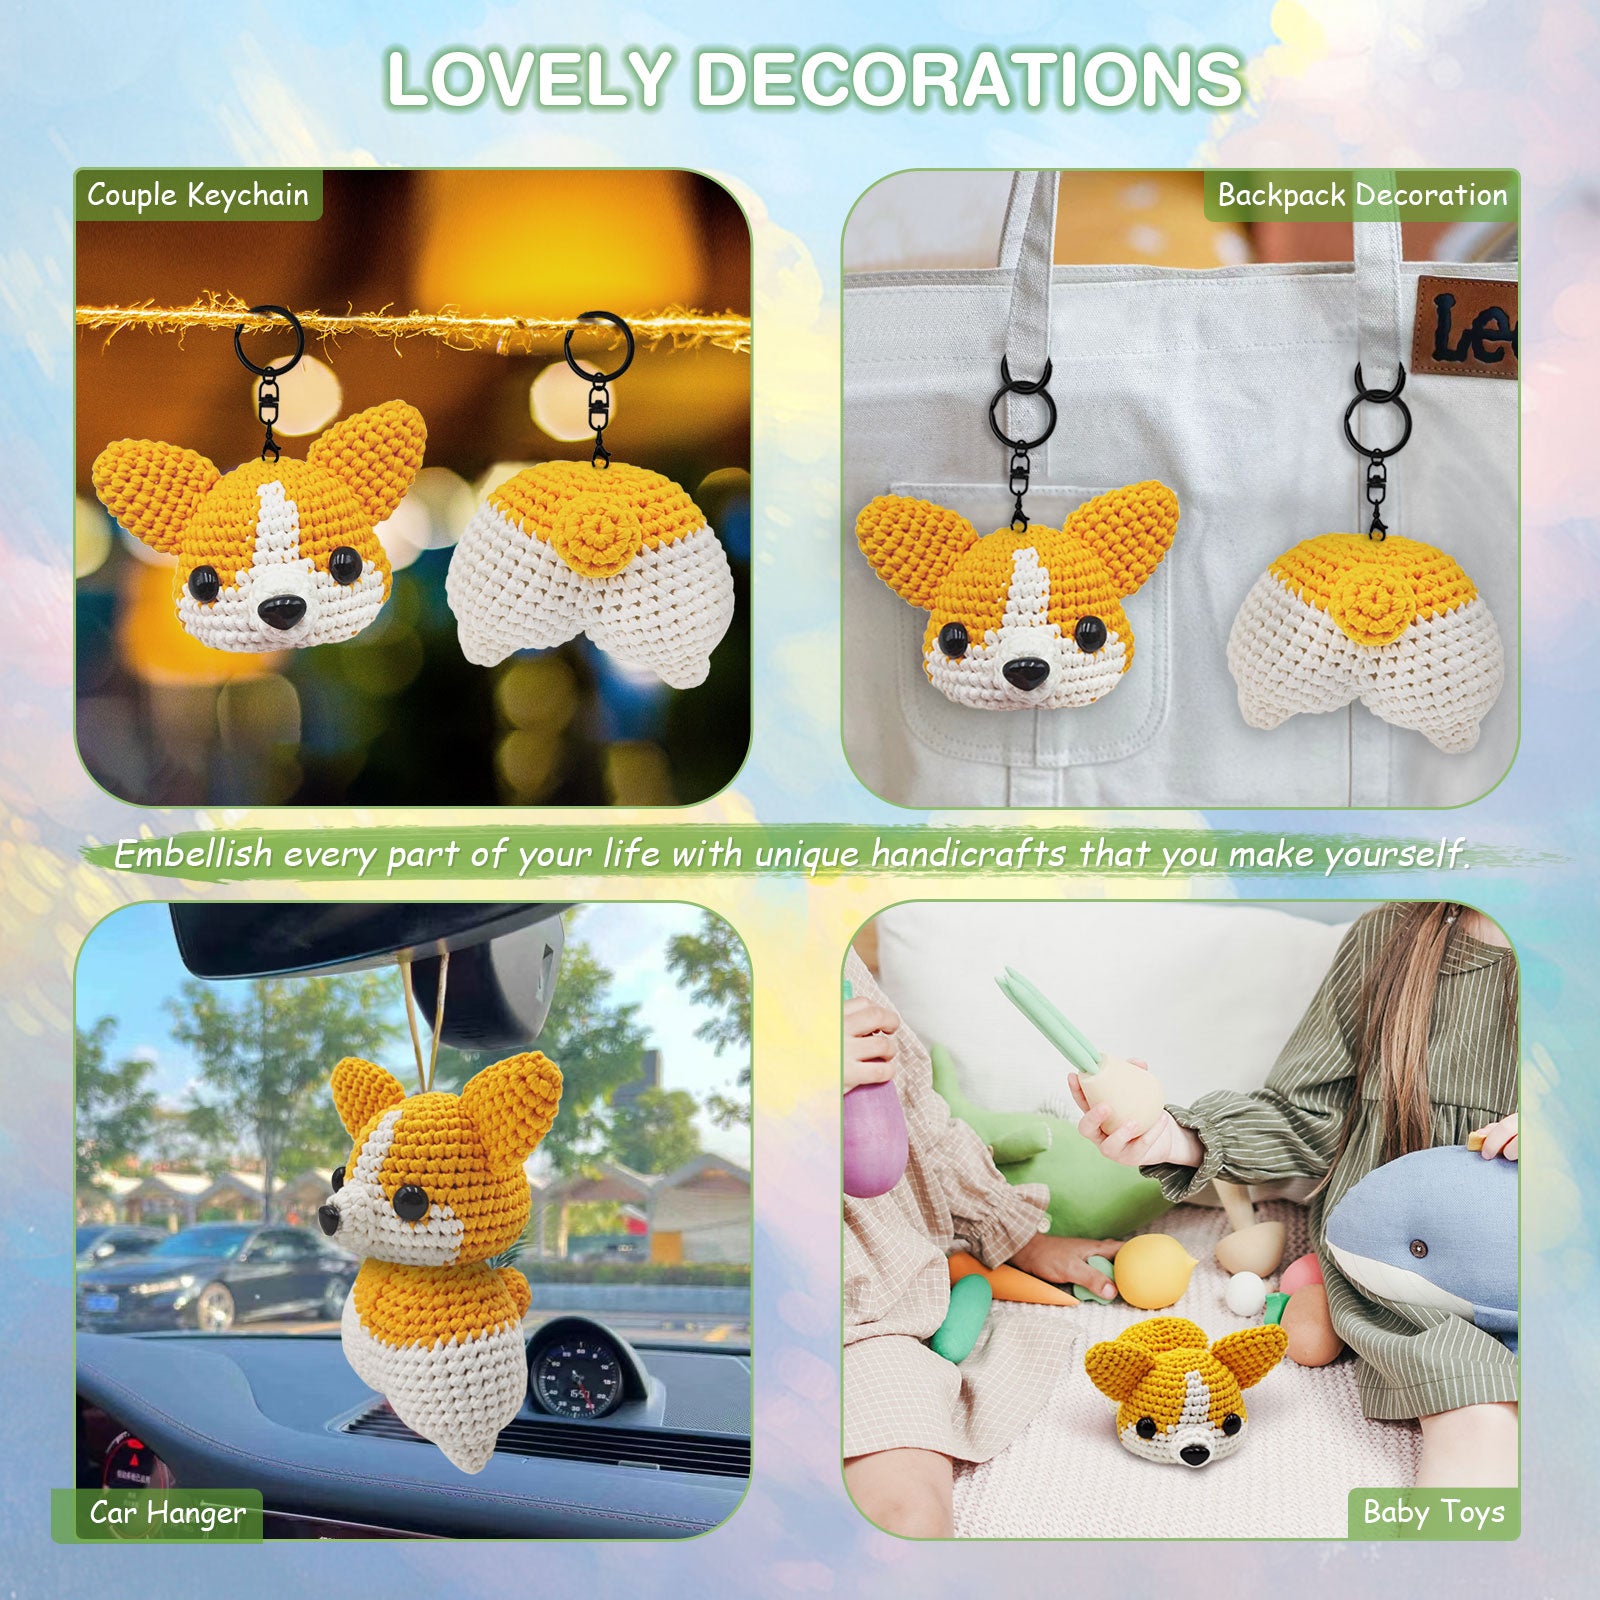 NICEEC Corgi Crochet Kit for Beginners Yarn Crochet Animal Kit for Starter Kits with Step-by-Step Video Tutorials for Adults and Kids